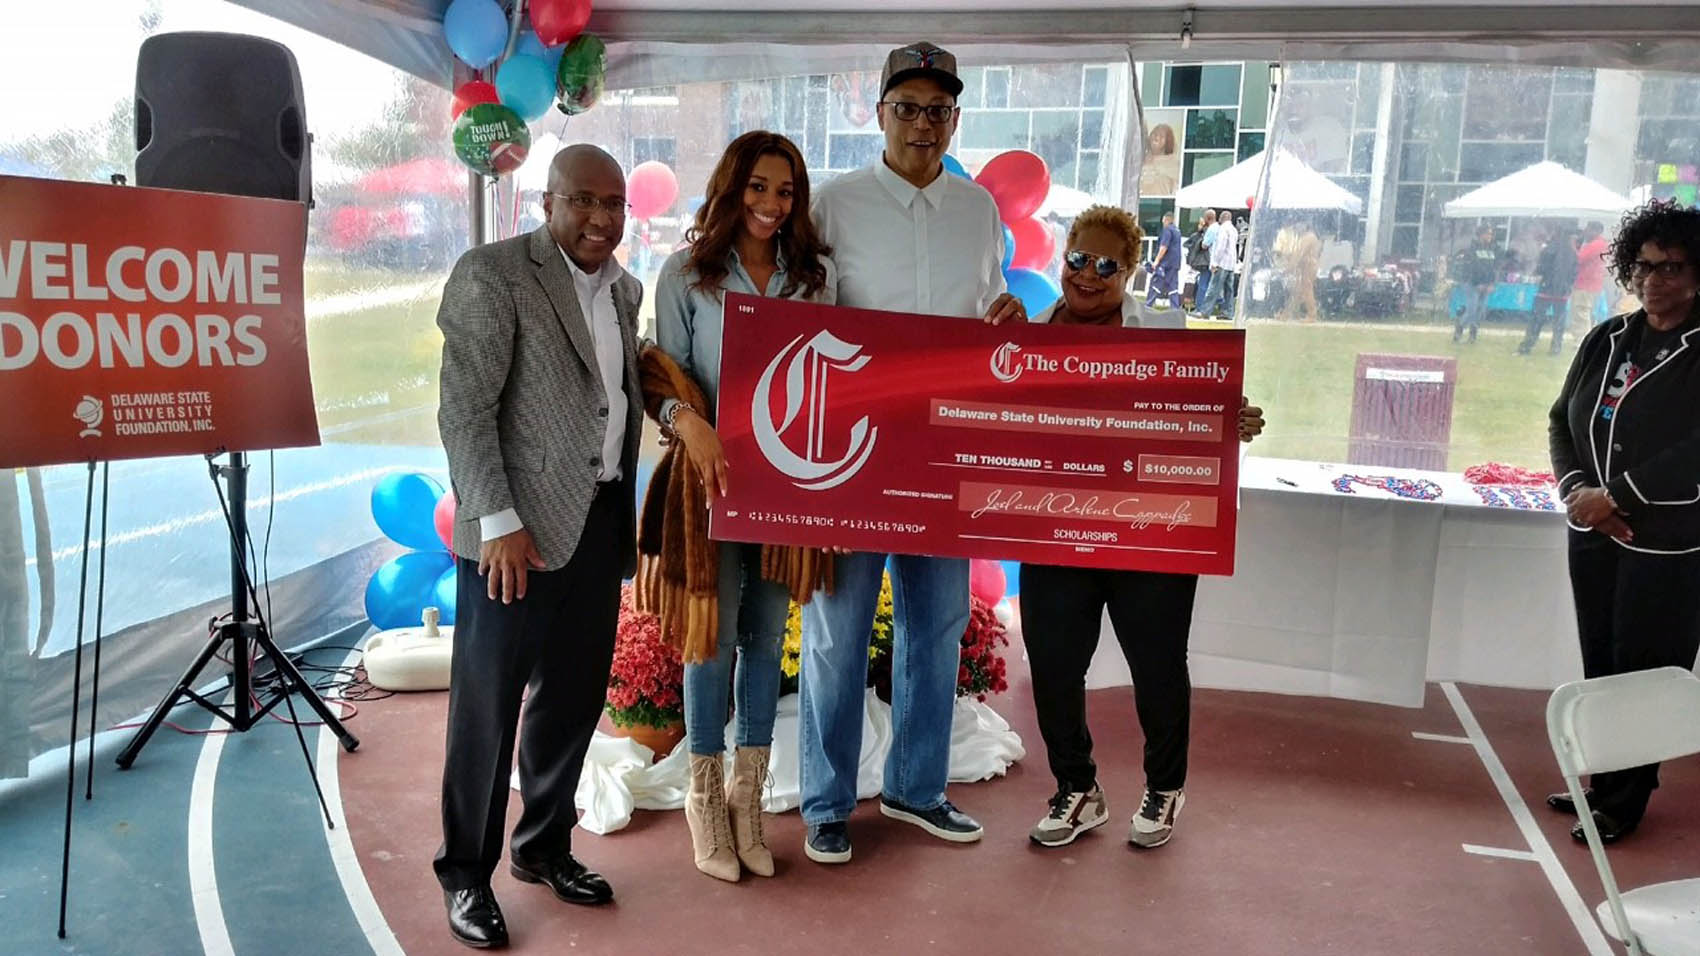 (L-r) DSU President Harry L. Williams, Alexandra Coppadge, and her parents Joel and Arlene Coppadge pose with a display check representing the scholarship endowment the couple has established.